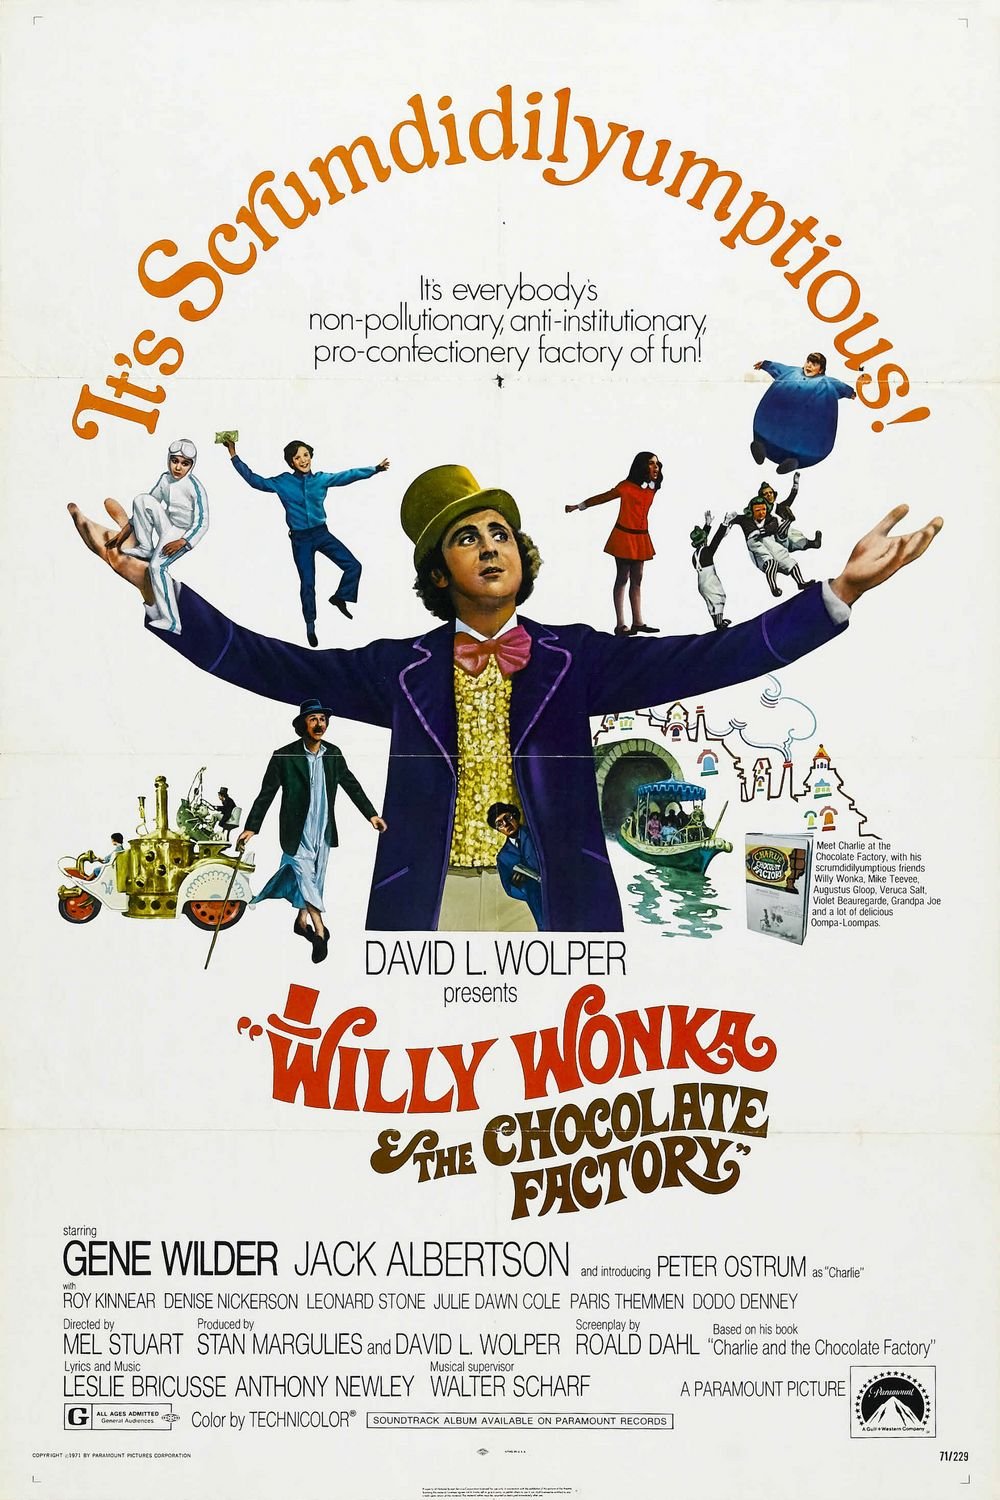 L'affiche du film Willy Wonka & the Chocolate Factory